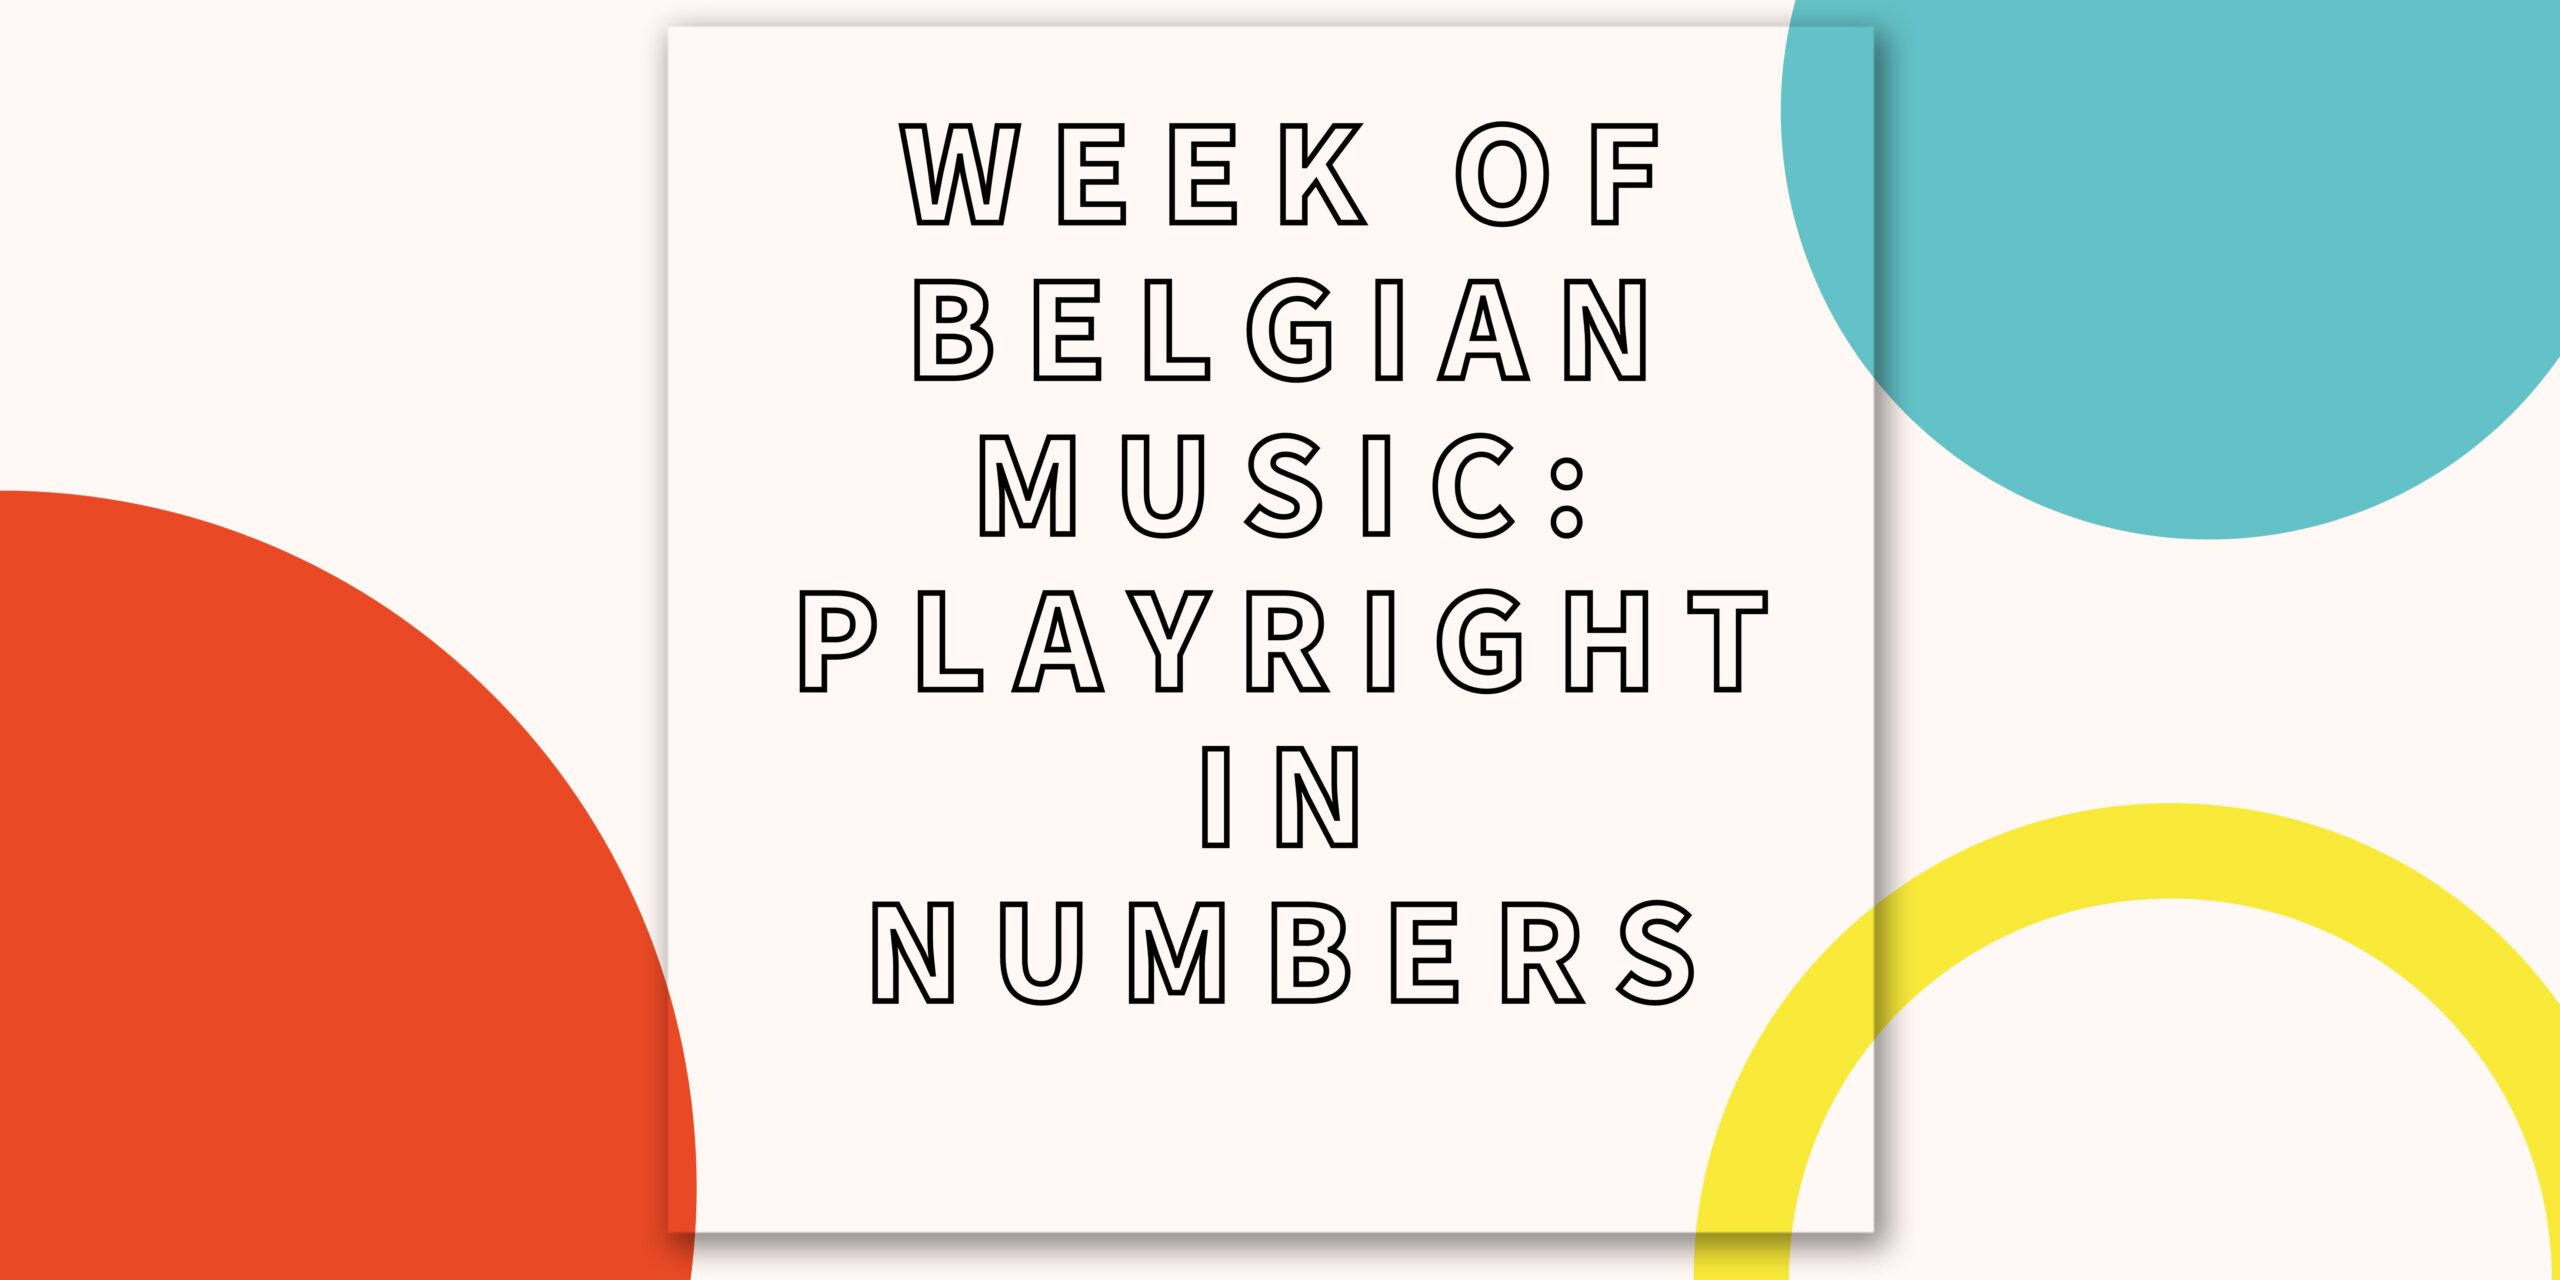 Week of Belgian Music: what does PlayRight do for Belgian musicians?